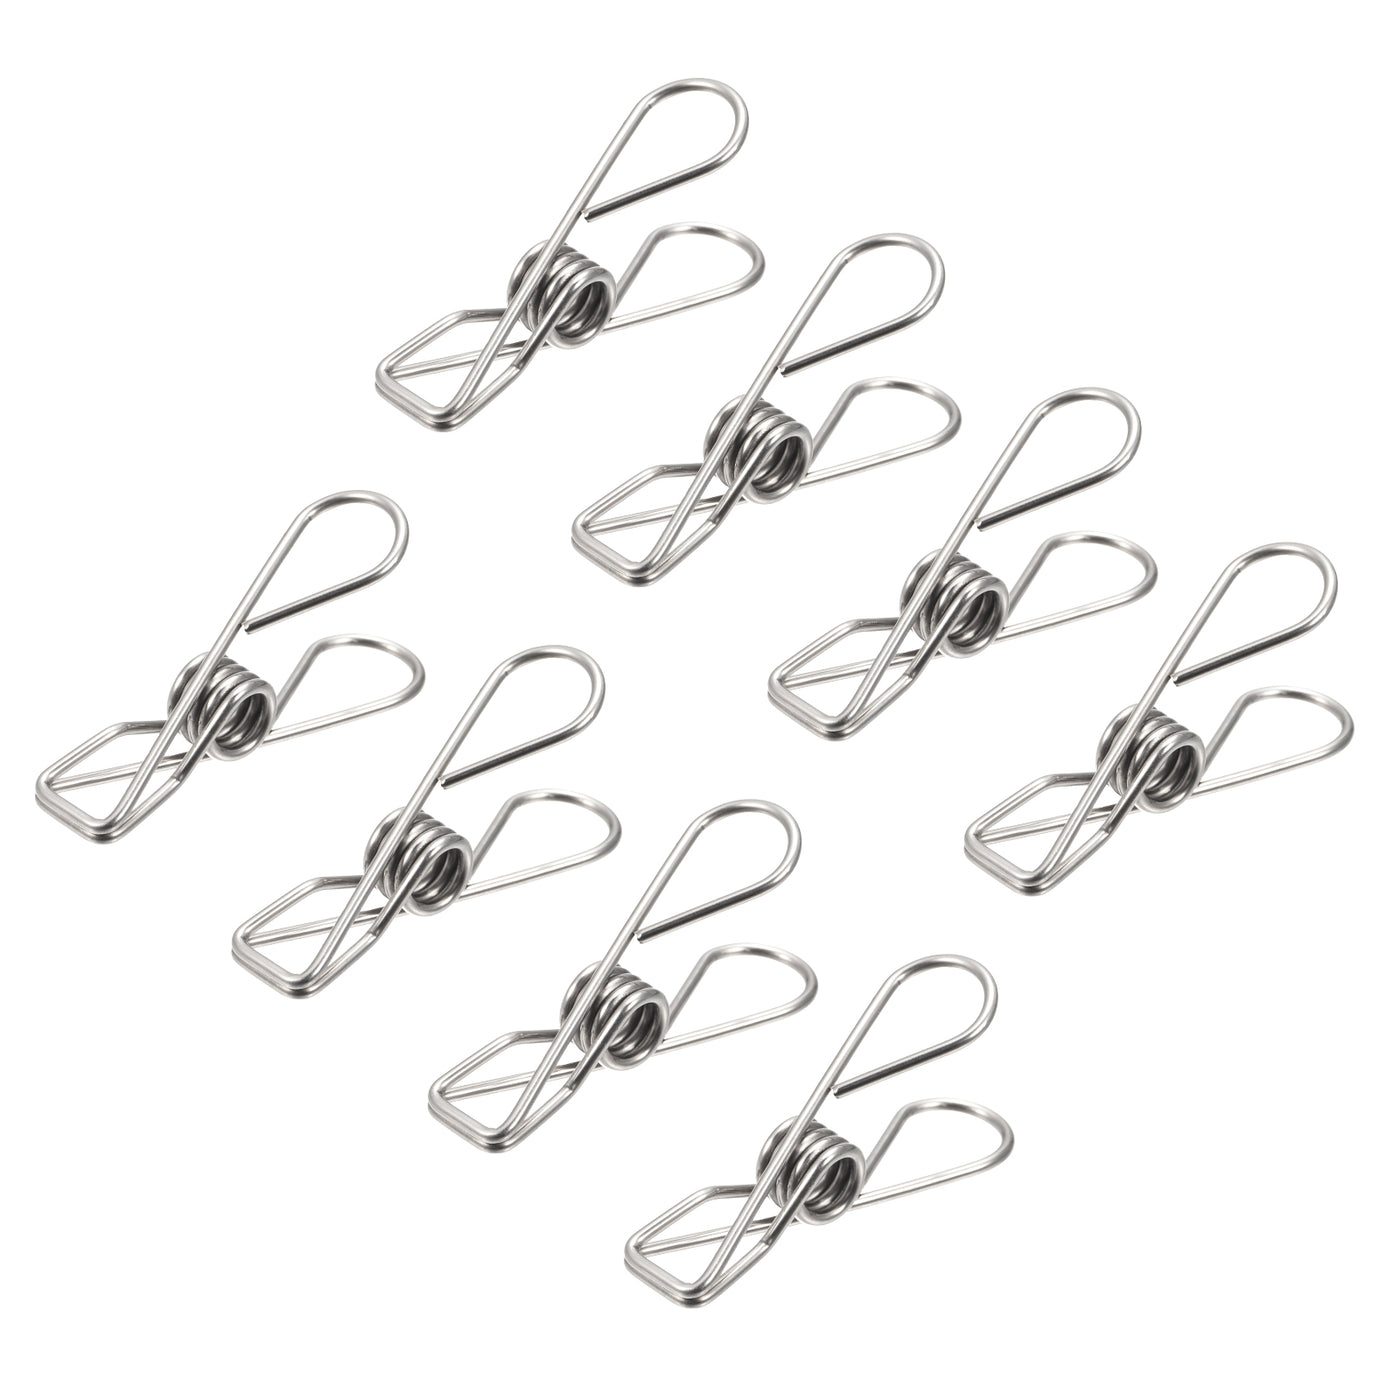 uxcell Uxcell Tablecloth Clips - 50mm Stainless Steel Wire Clamps for Fixing Table Cloth Hanging Clothes, 14 Pcs